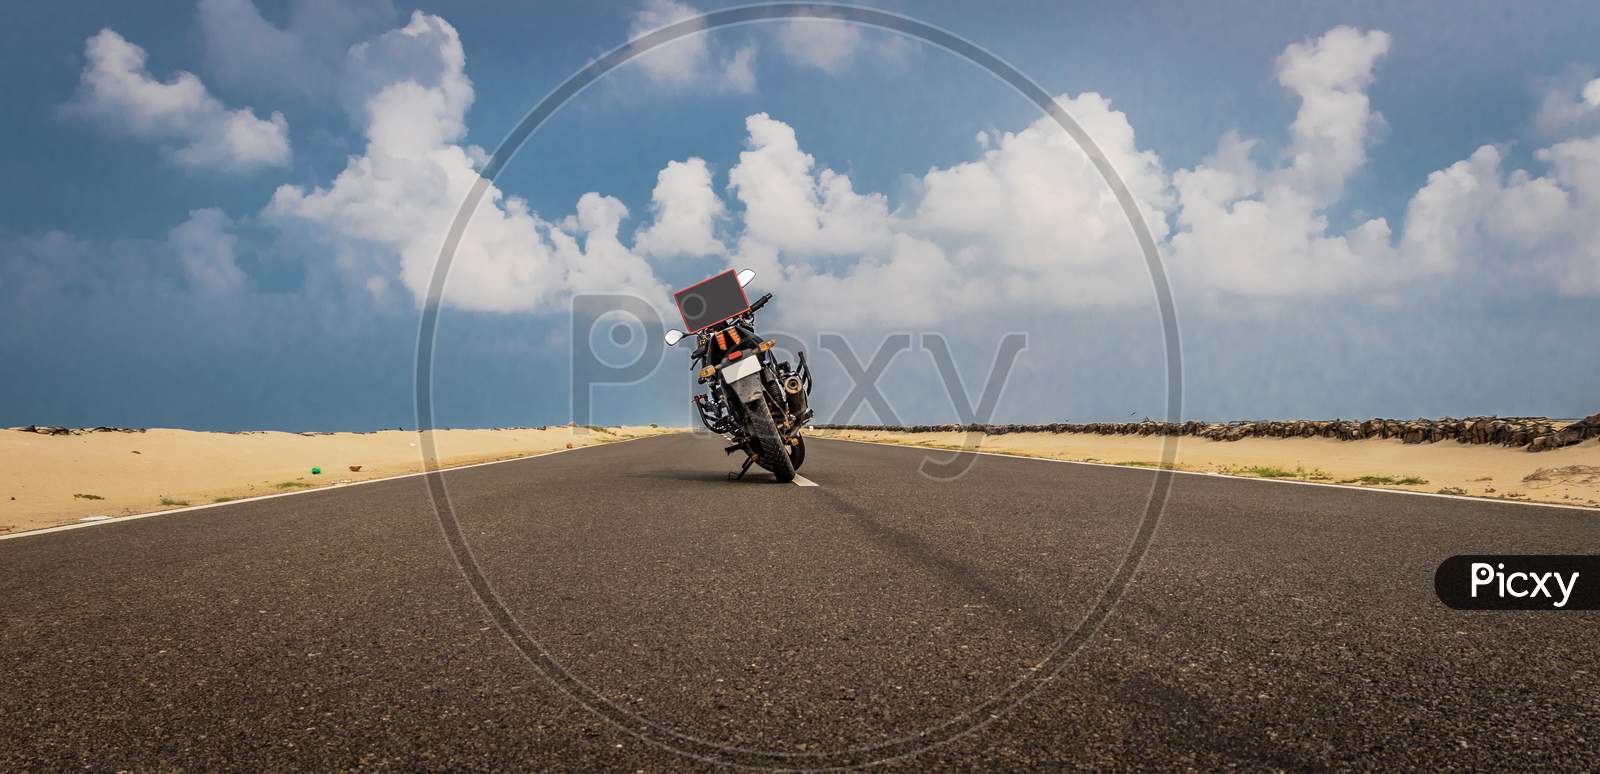 Motorcycle On Road With Sky And Ridding Love Message